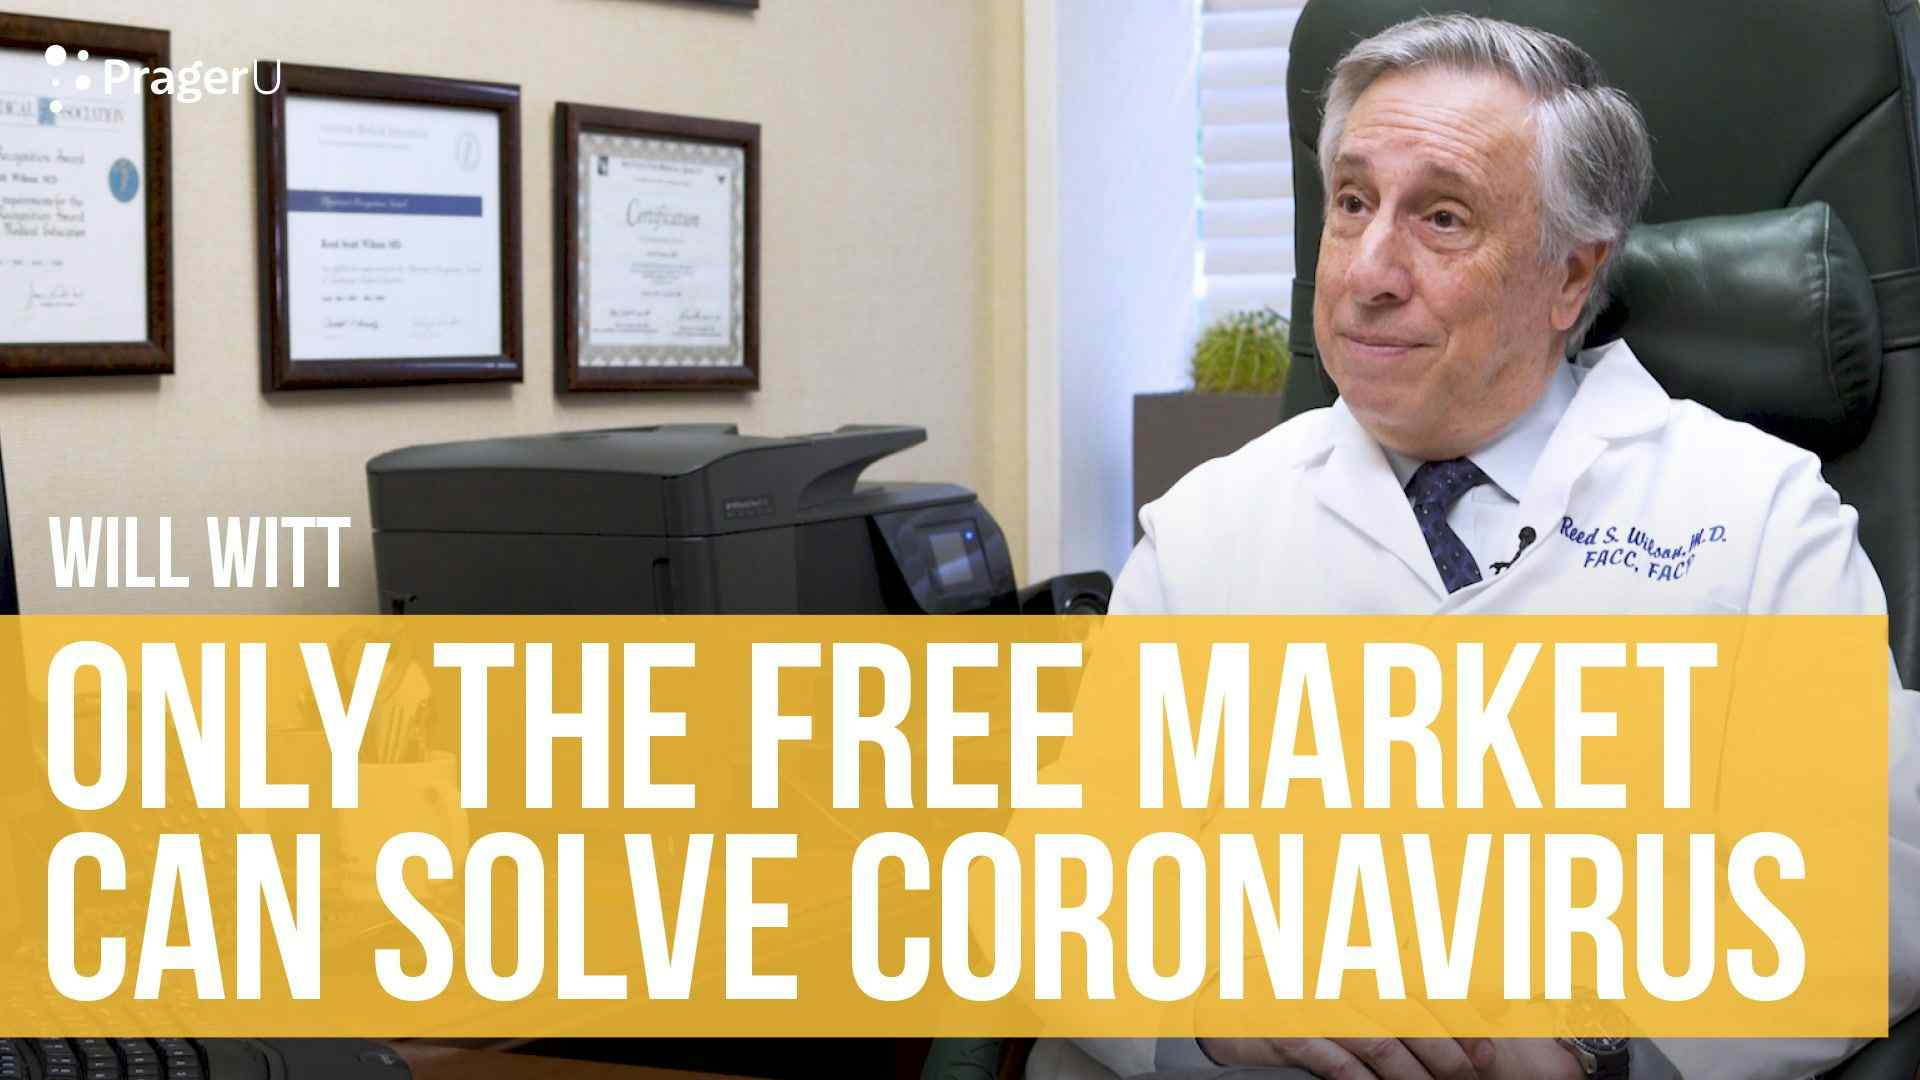 Only the Free Market Can Solve Coronavirus